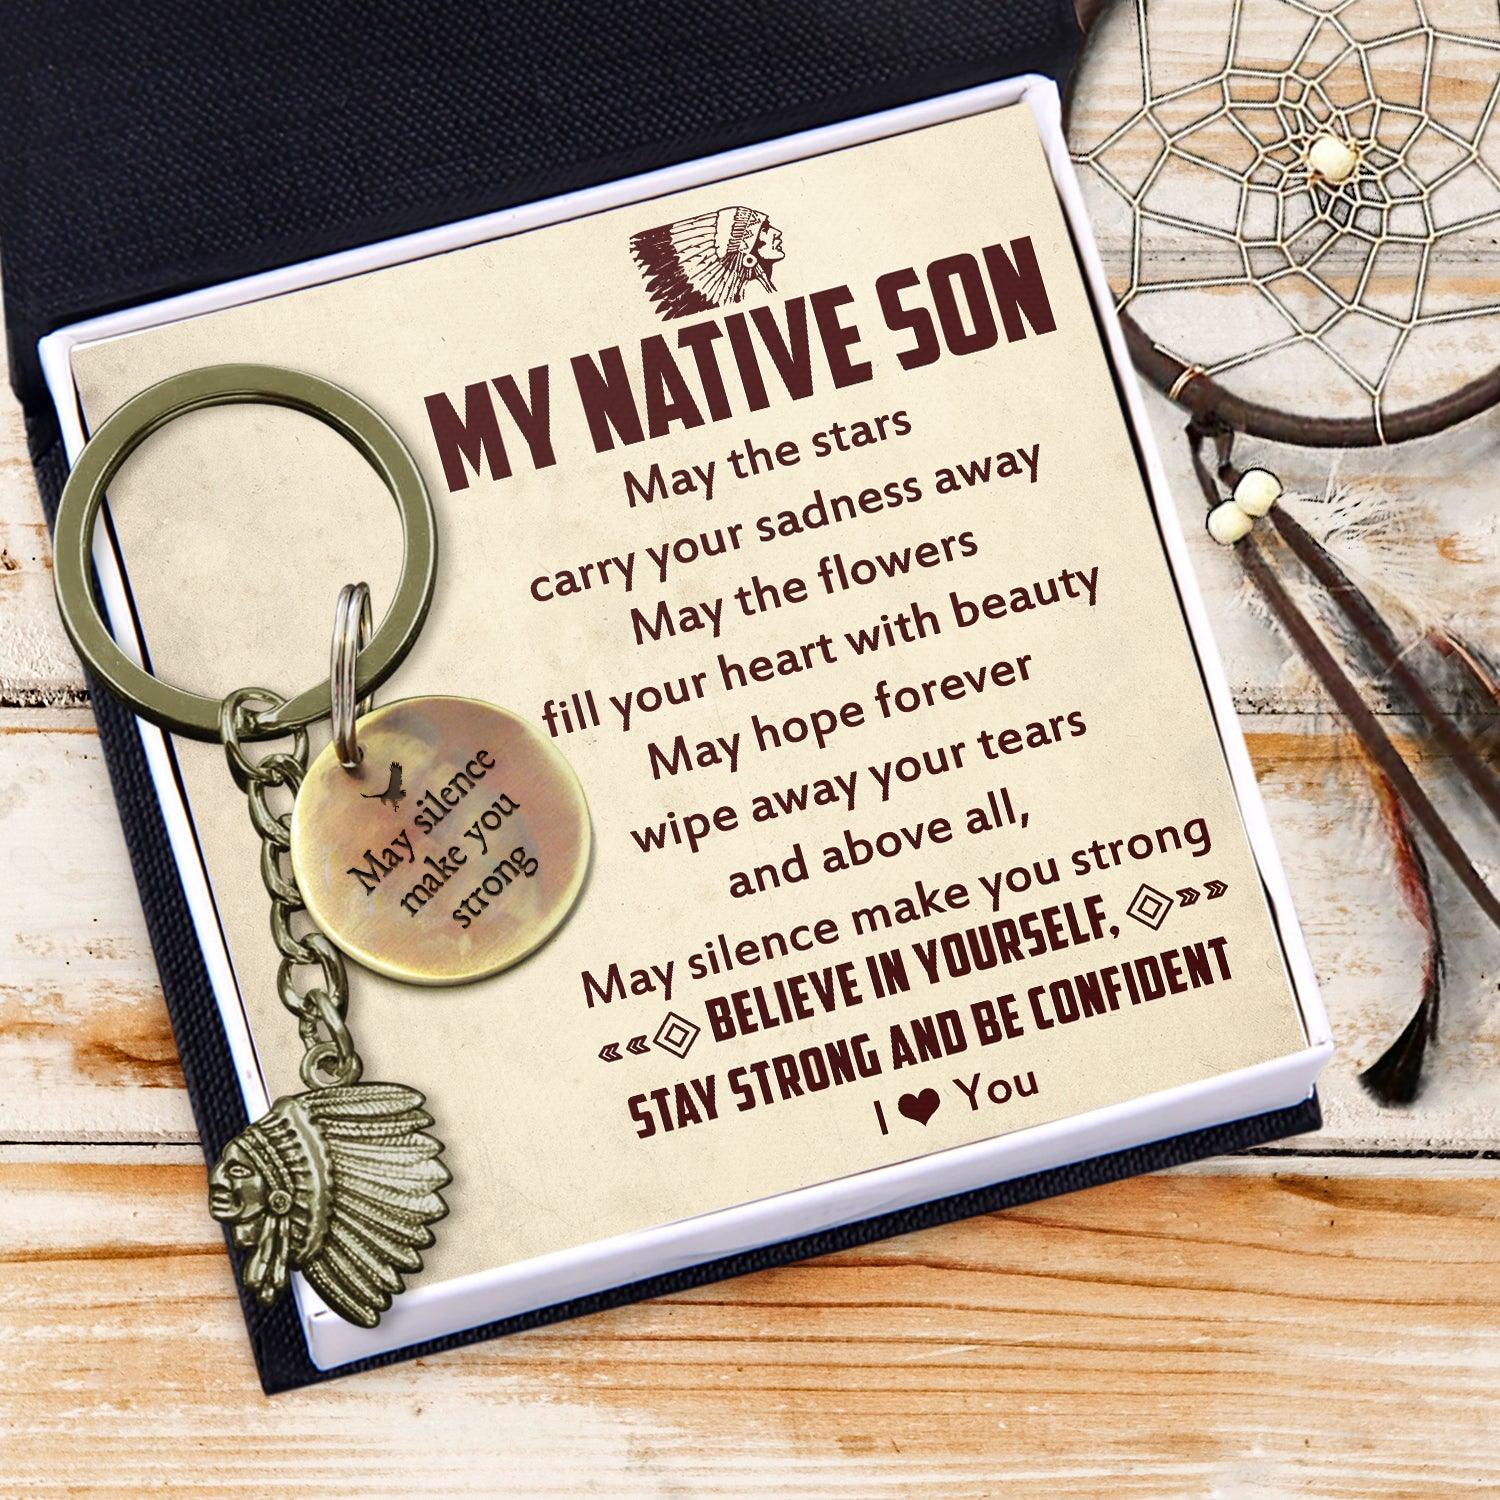 Indian Chief Keychain - Native American - To My Native Son - Believe In Yourself, Stay Strong And Be Confident - Augkek16001 - Gifts Holder